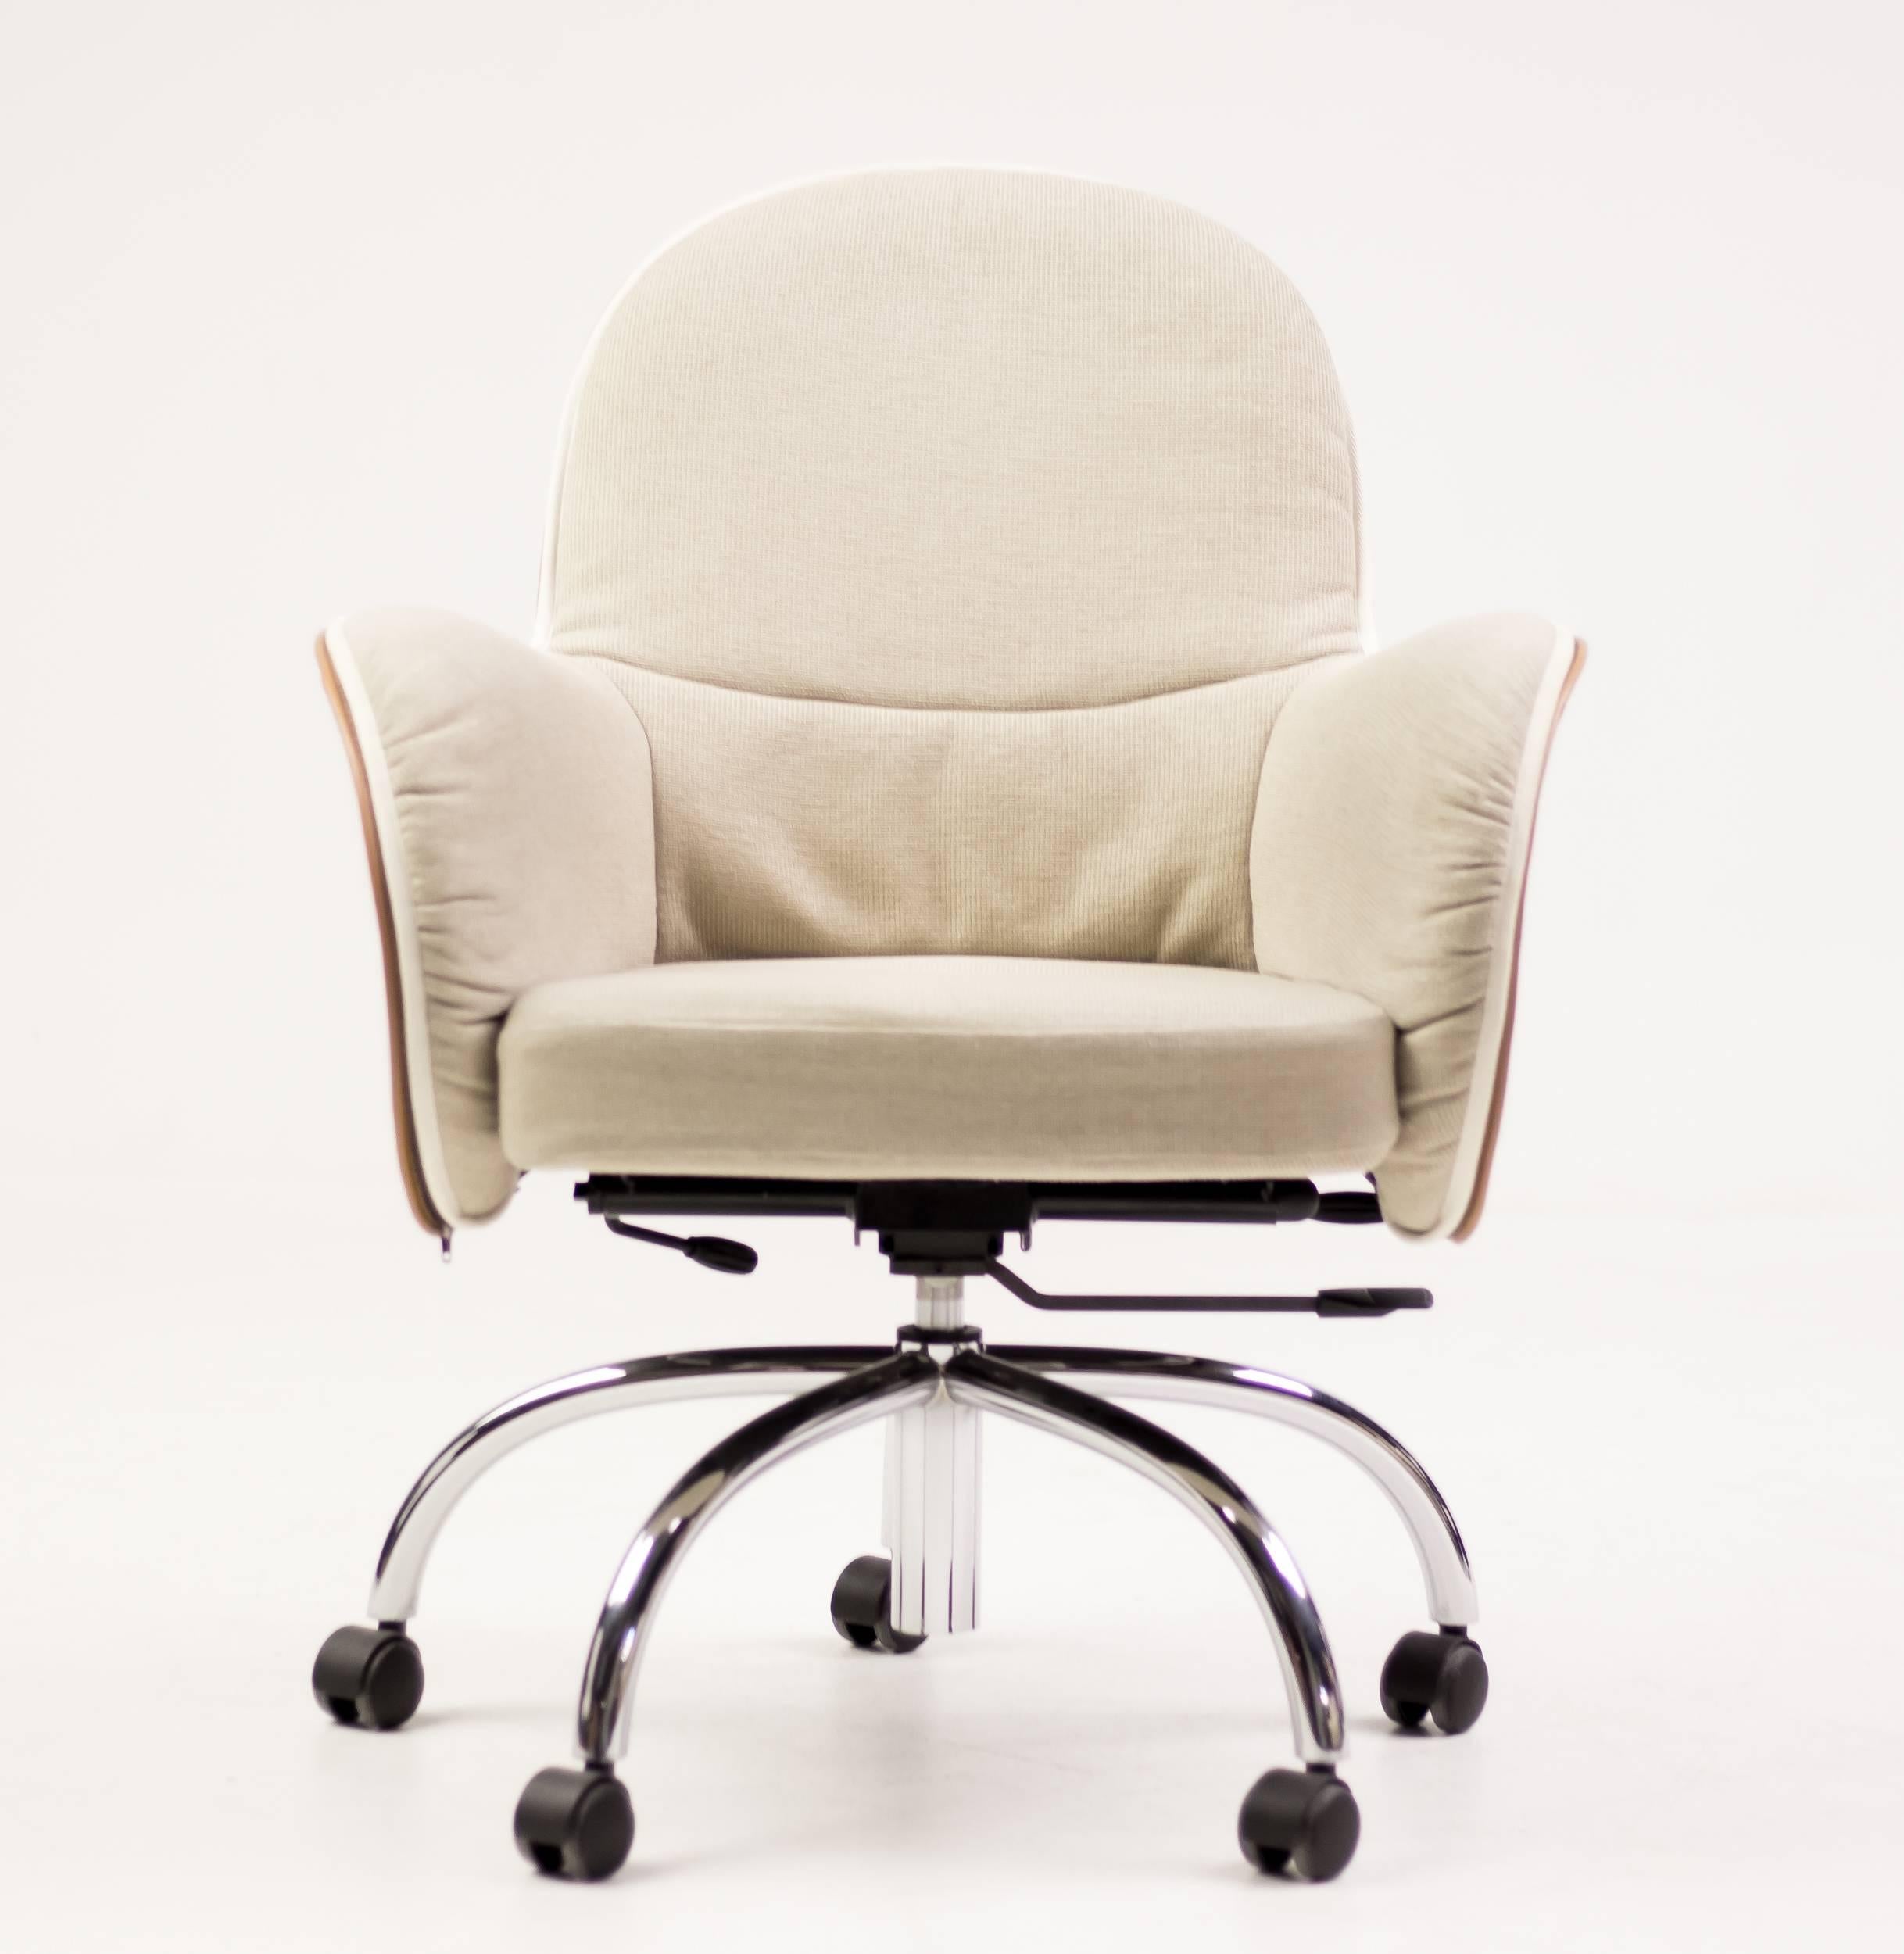 De Padova Incisa Chair and Serbelloni Desk Chair in Saddle Leather 4